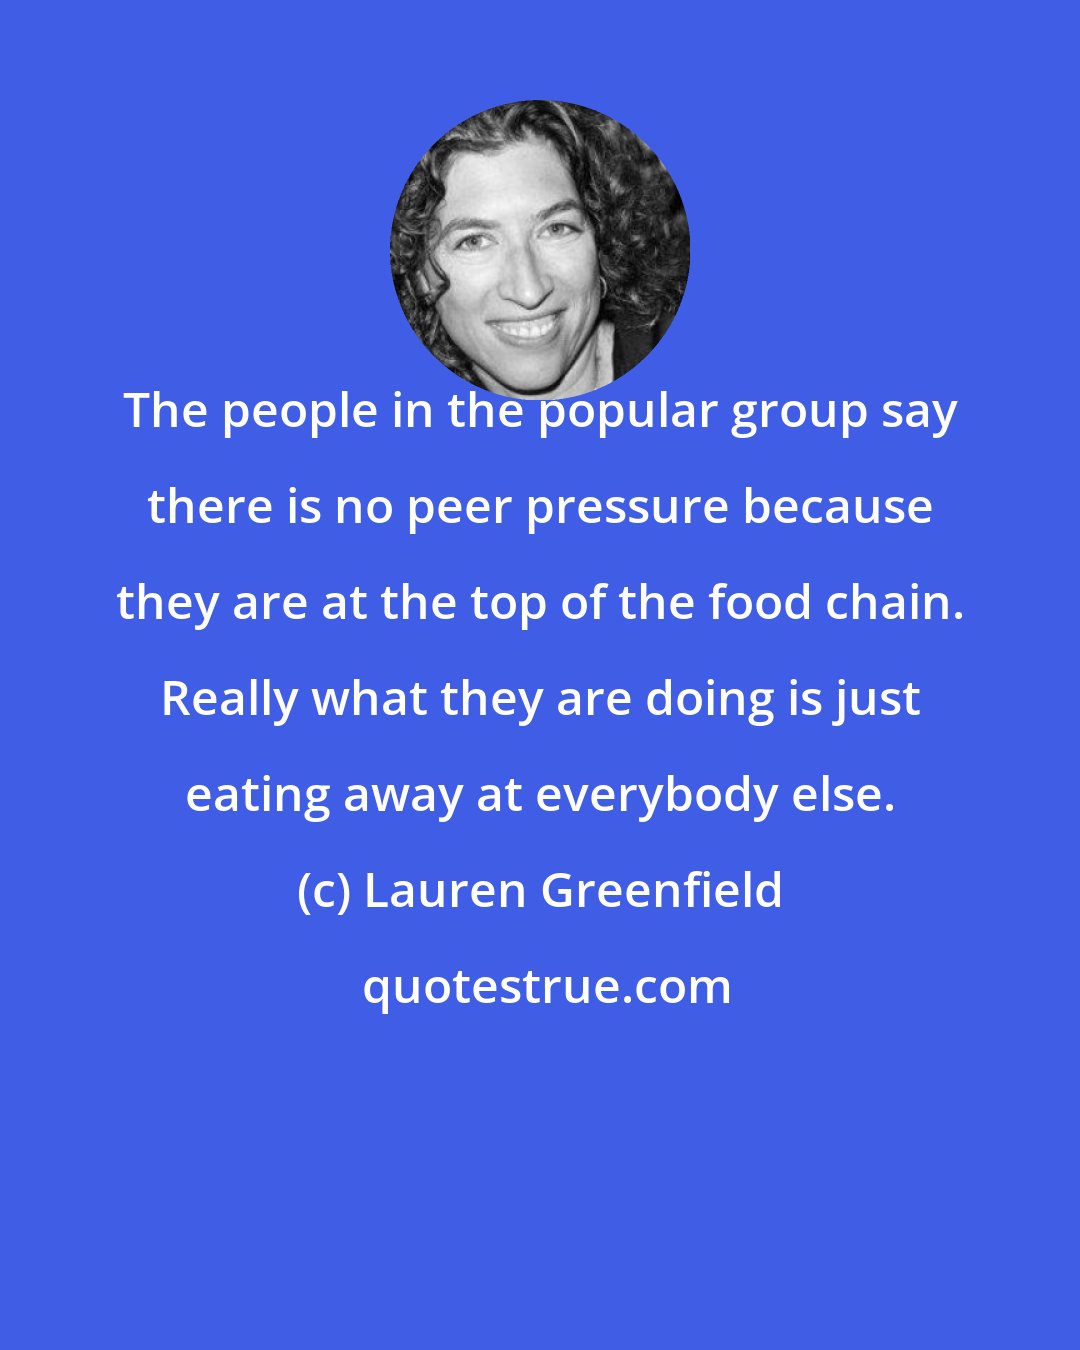 Lauren Greenfield: The people in the popular group say there is no peer pressure because they are at the top of the food chain. Really what they are doing is just eating away at everybody else.